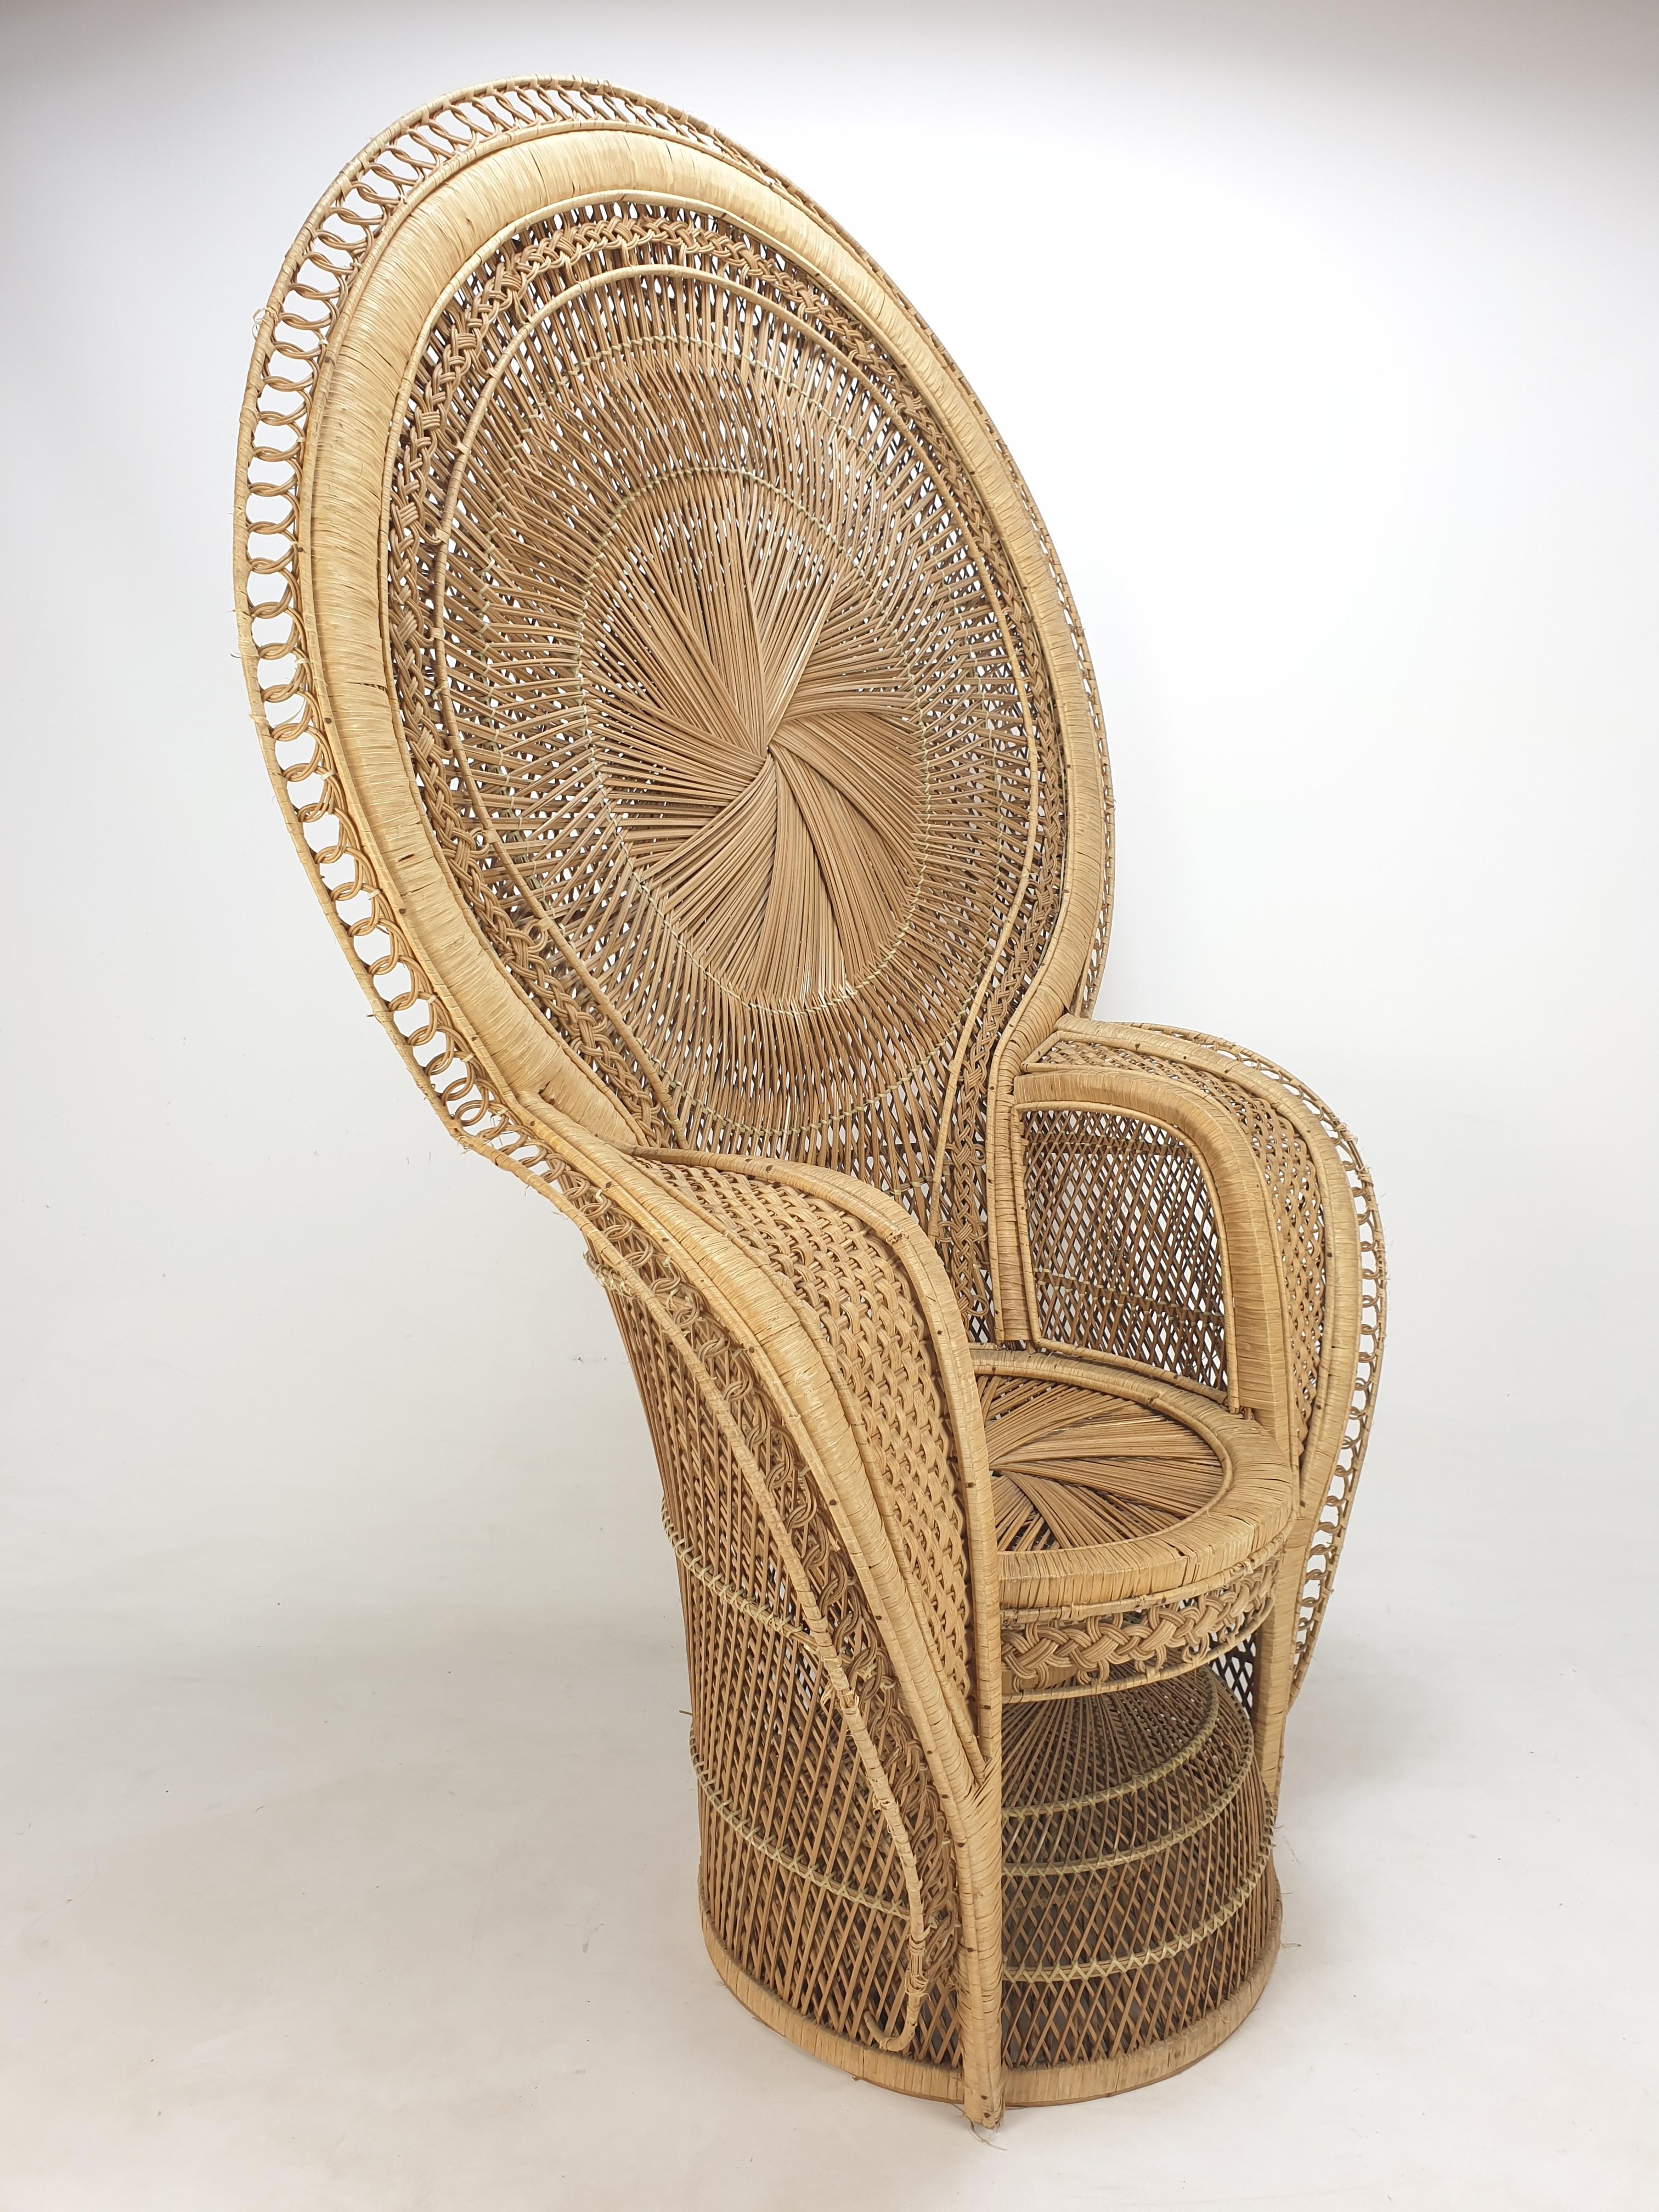 Midcentury Emmanuelle or Peacock Rattan and Wicker Chair, Italy 1960s For Sale 1